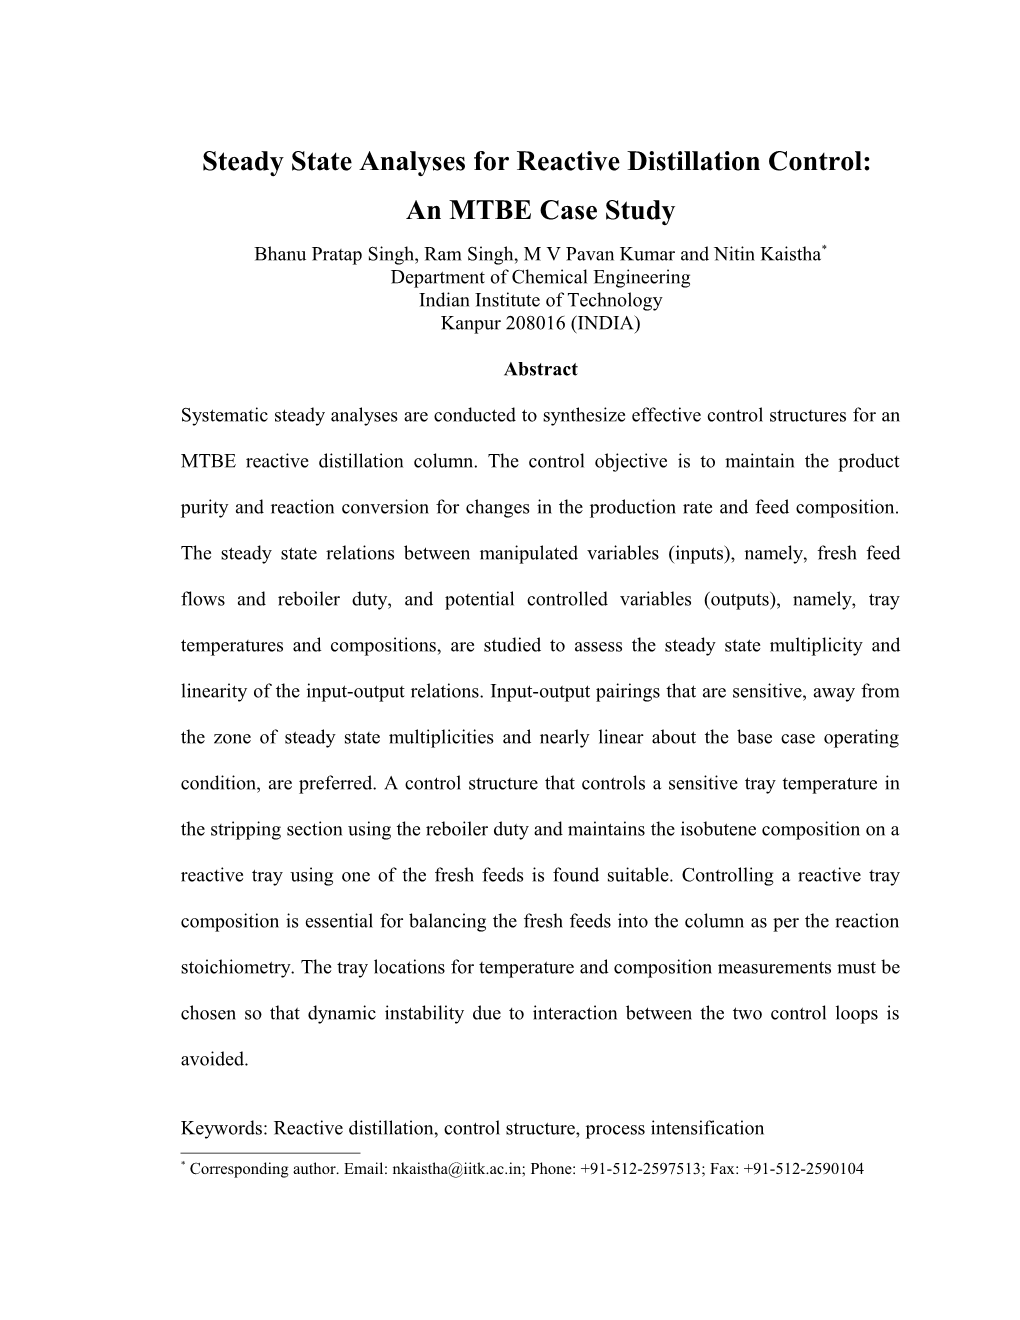 Control Structure Synthesis Using Steady State Analyses: an MTBE Case Study